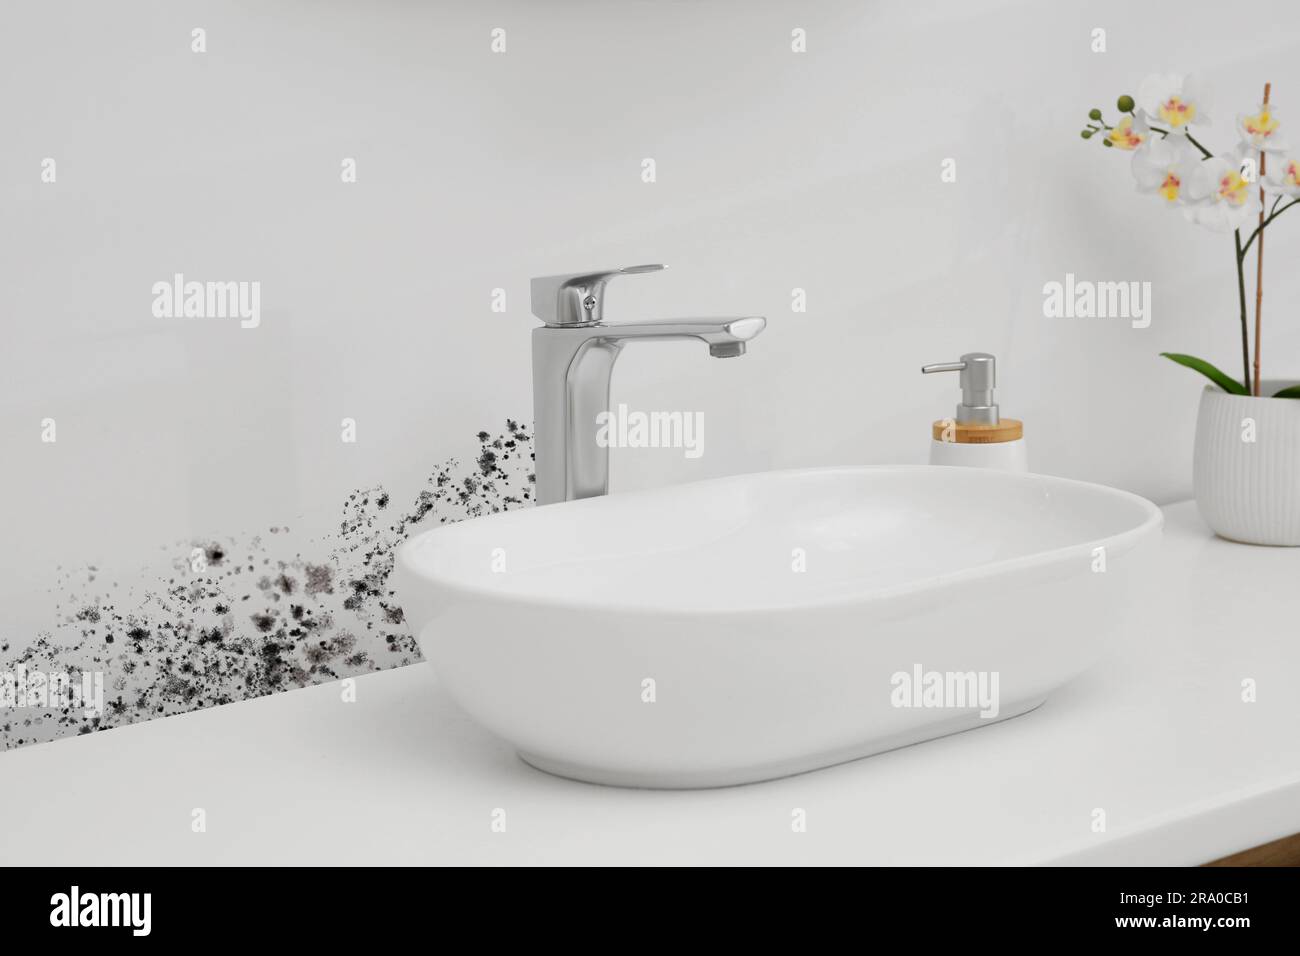 White wall affected with mold. White washbasin, orchid flowers and soap dispenser in bathroom Stock Photo